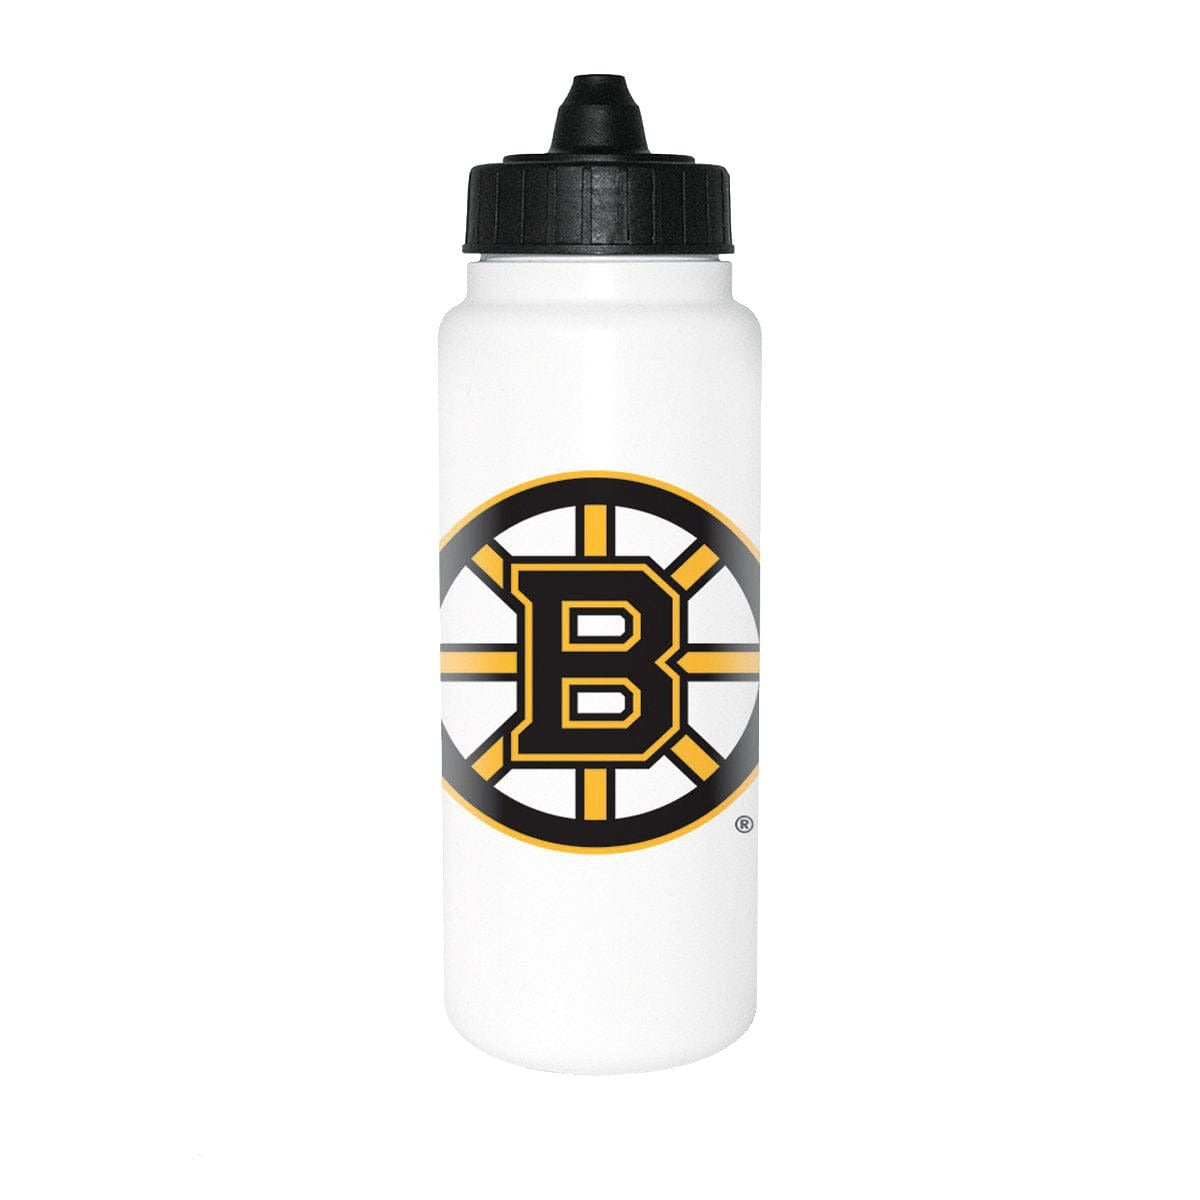 Boston Bruins Inglasco NHL Tall Water Bottle - The Hockey Shop Source For Sports